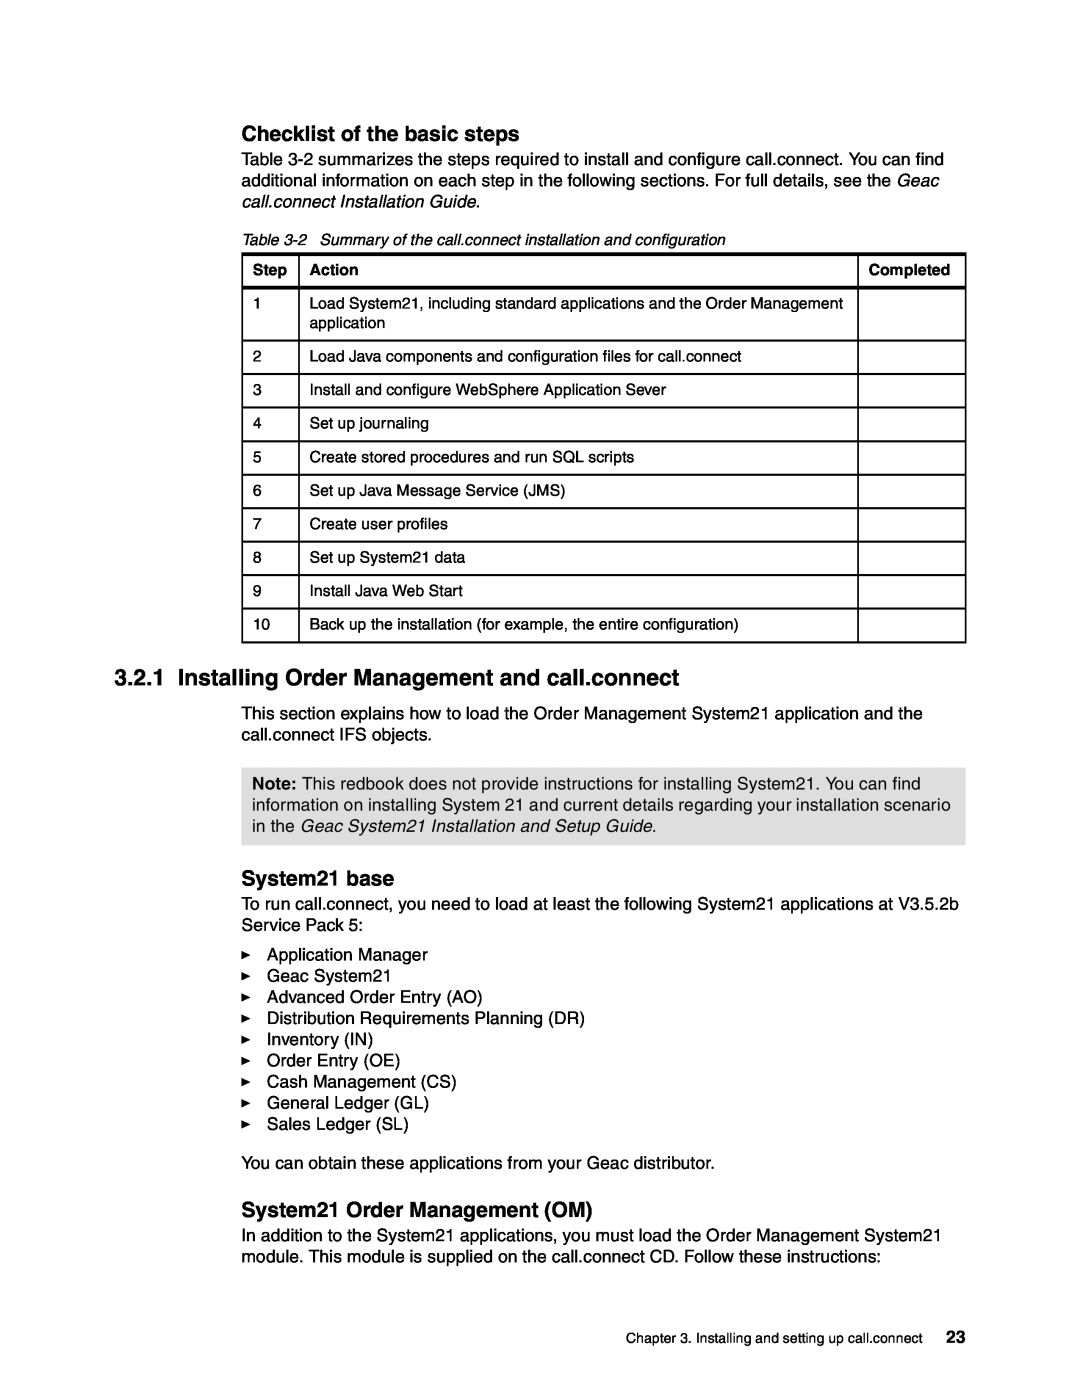 IBM SG24-6526-00 manual Installing Order Management and call.connect, Checklist of the basic steps, System21 base 